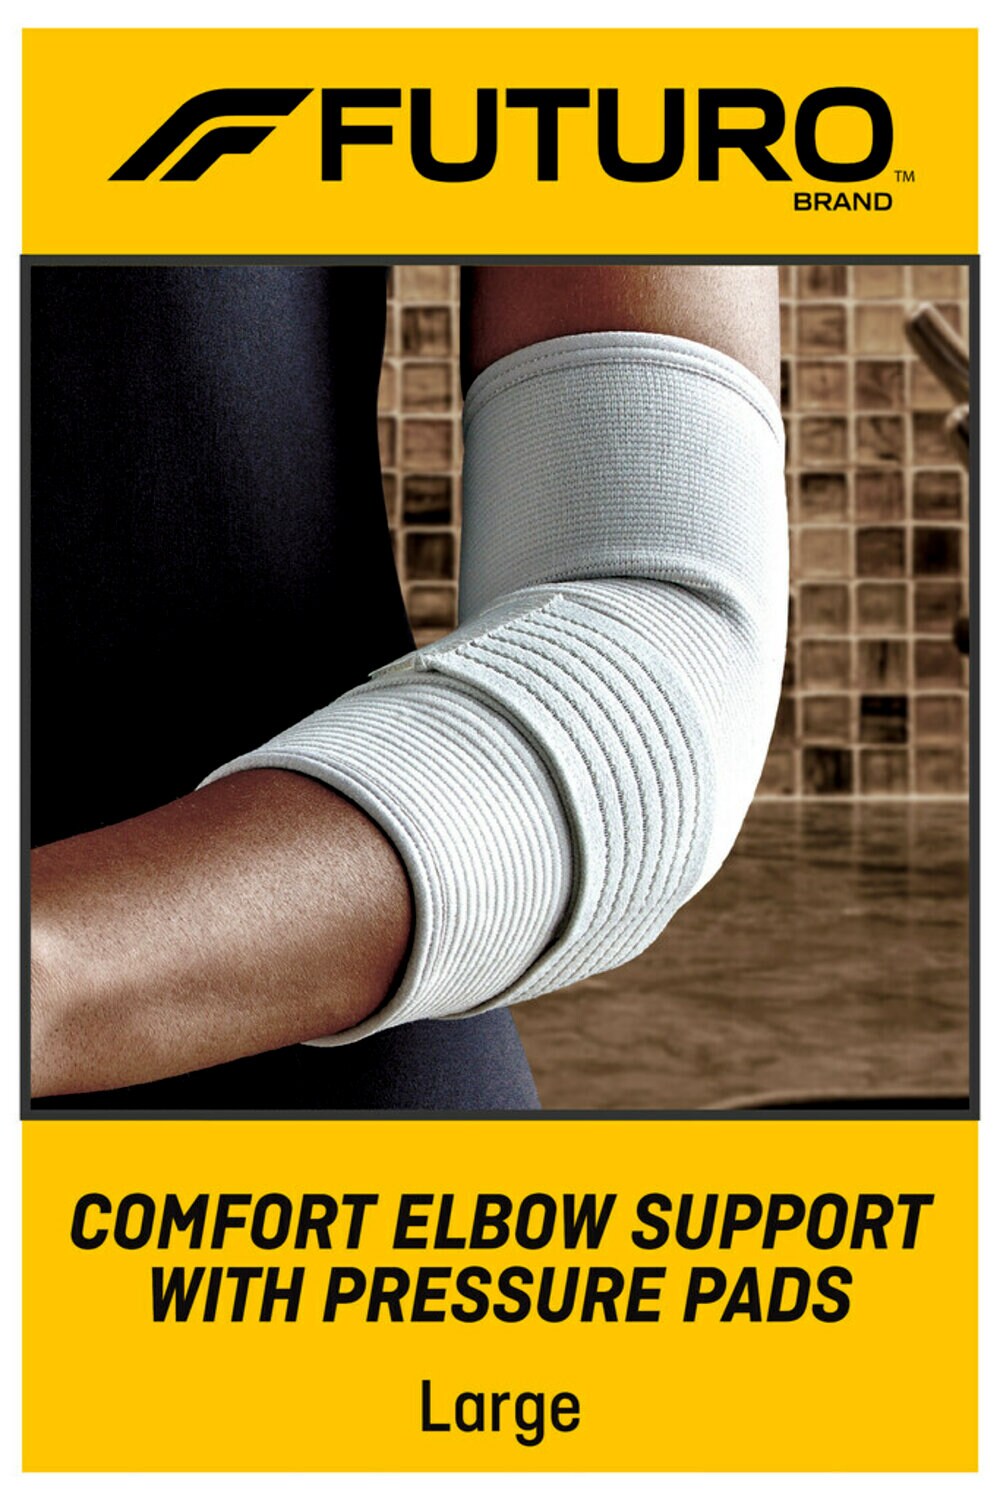 7100160872 - FUTURO Comfort Elbow with Pressure Pads, 47863ENR, Large